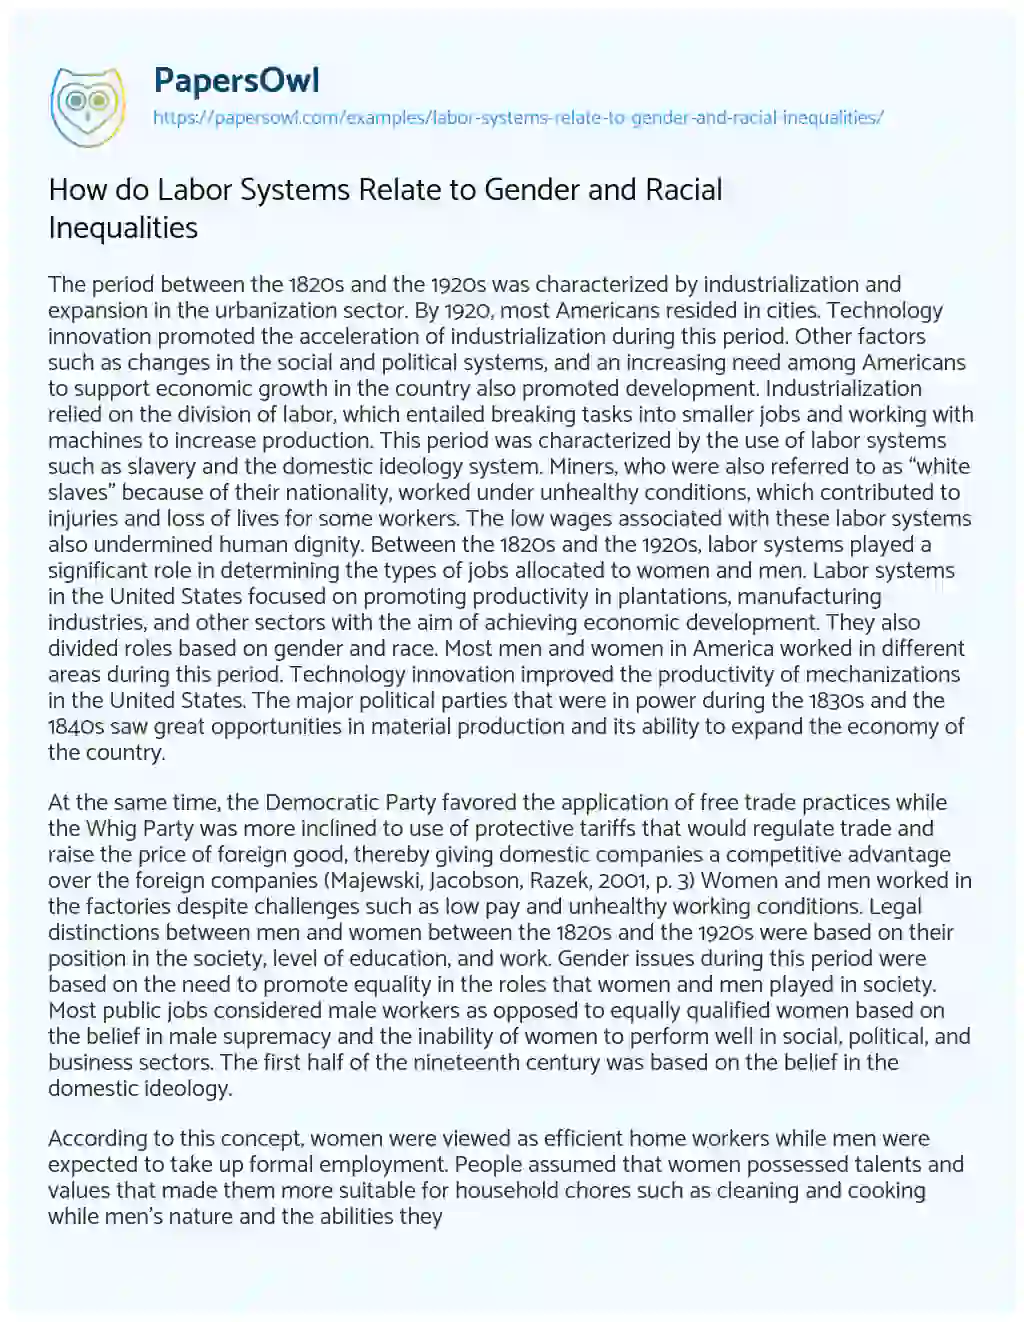 Essay on How do Labor Systems Relate to Gender and Racial Inequalities